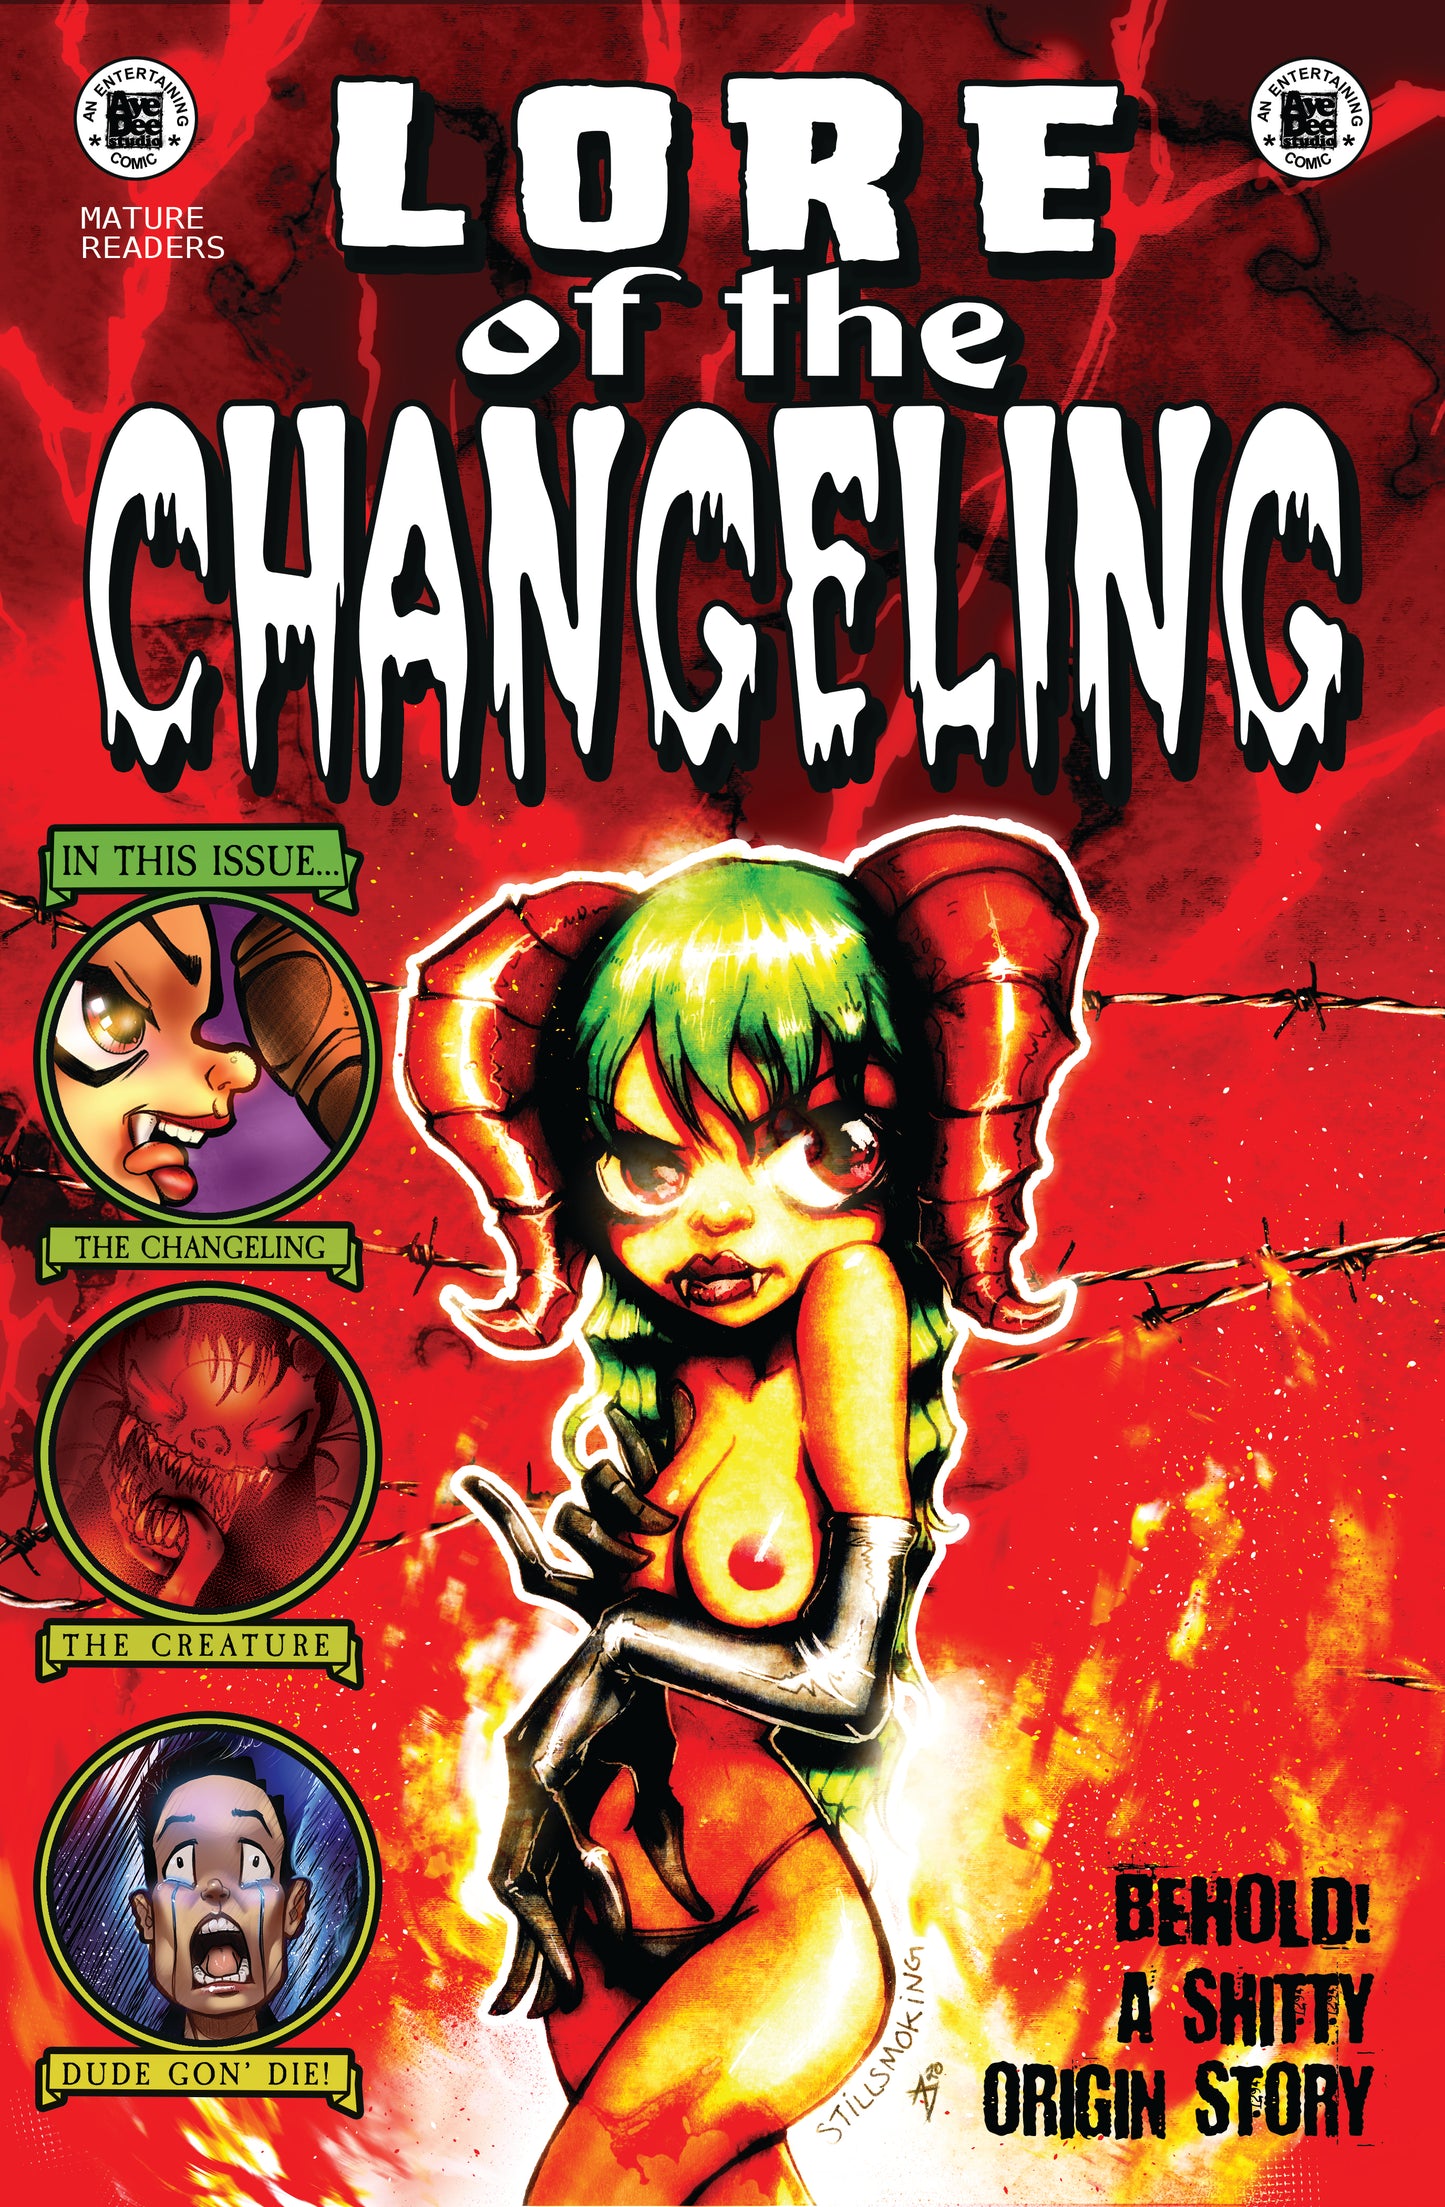 Lore of The Changeling Issue 1